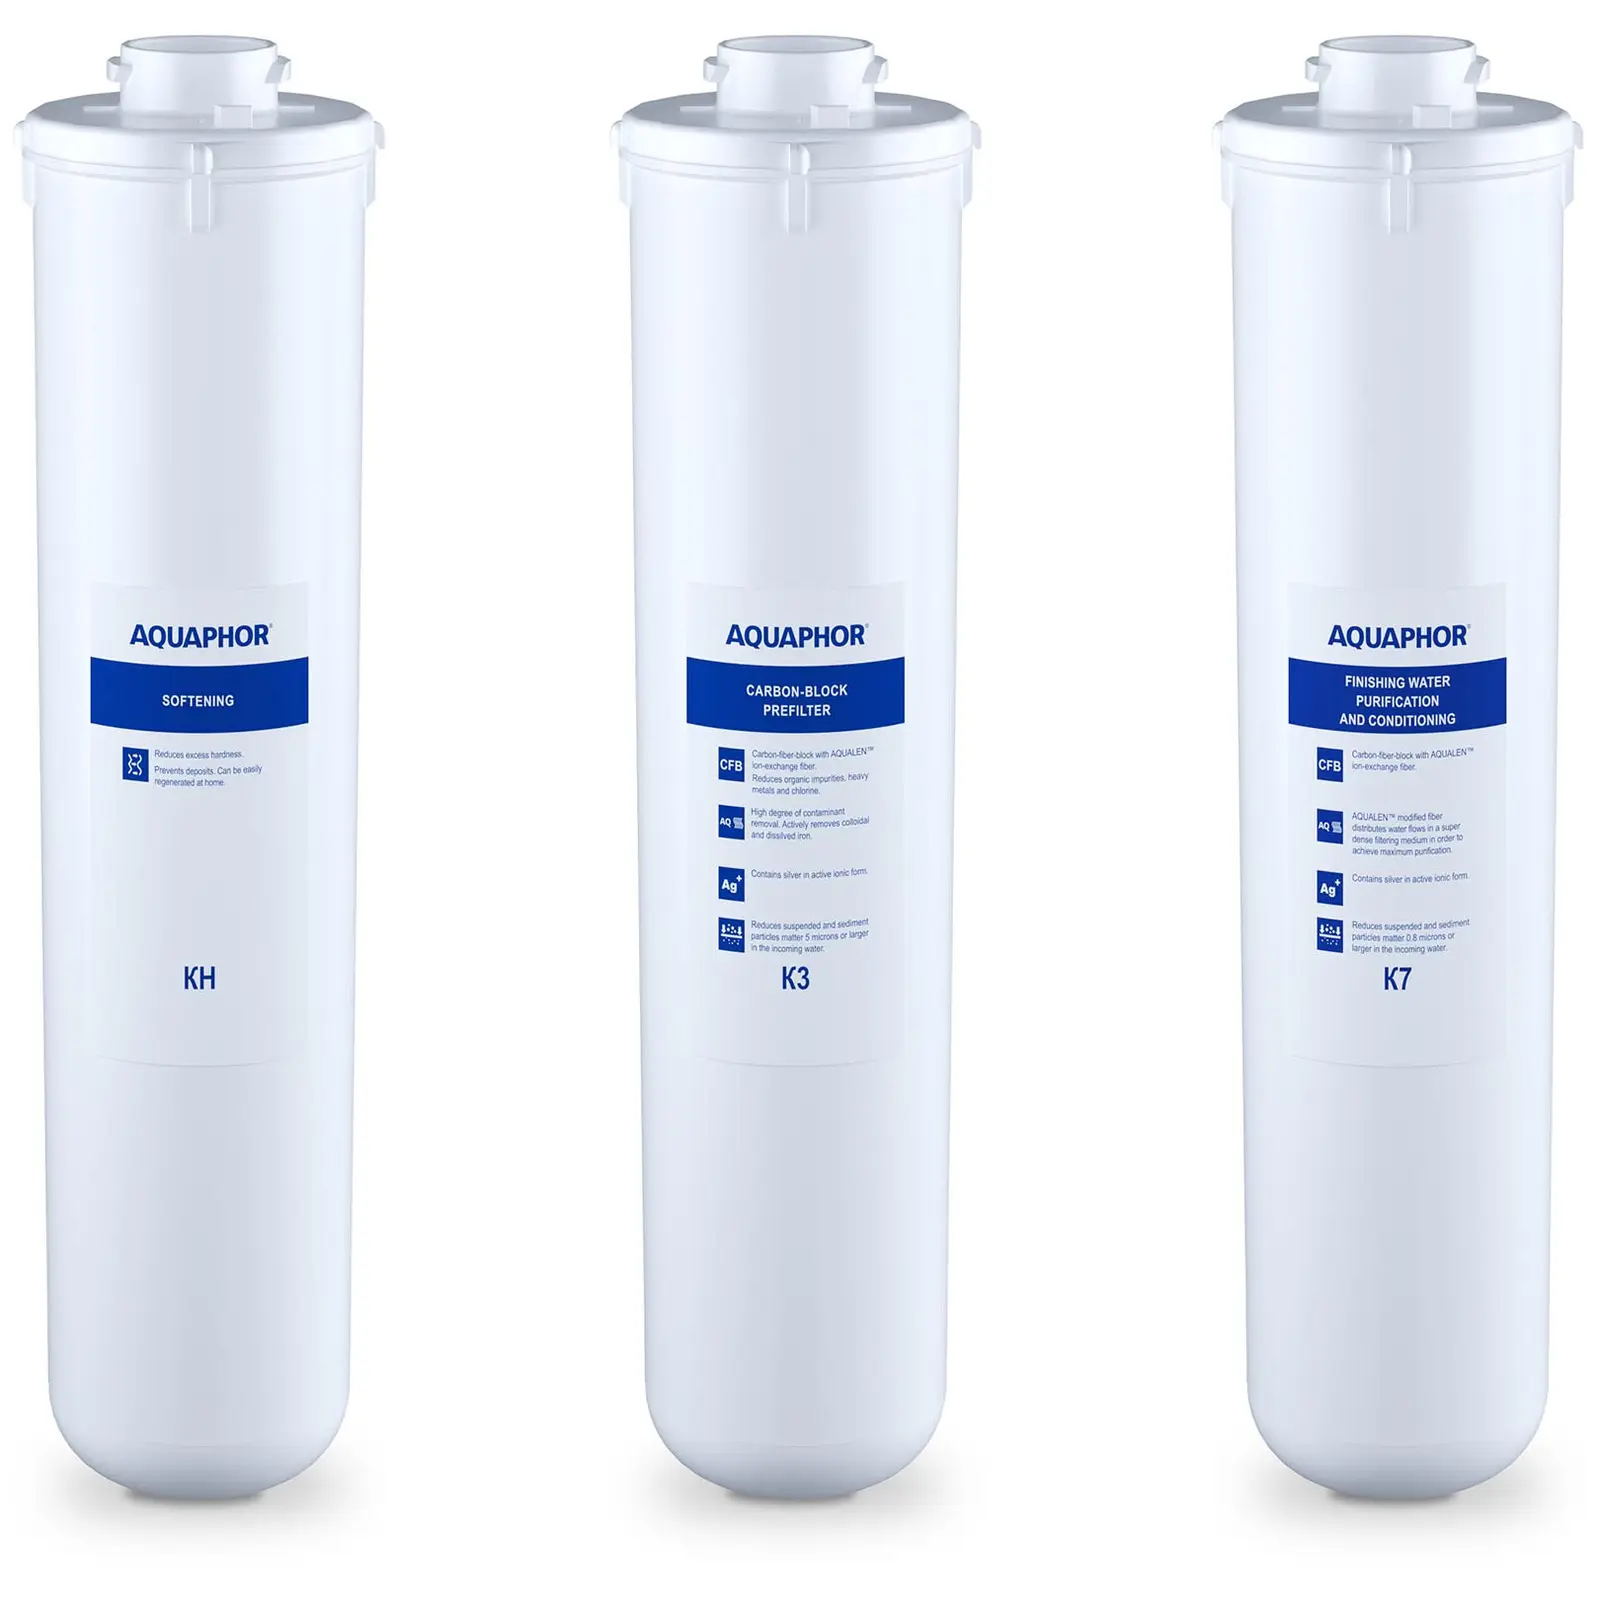 Aquaphor Activated Carbon Filter for Water - replacement filter set with softener